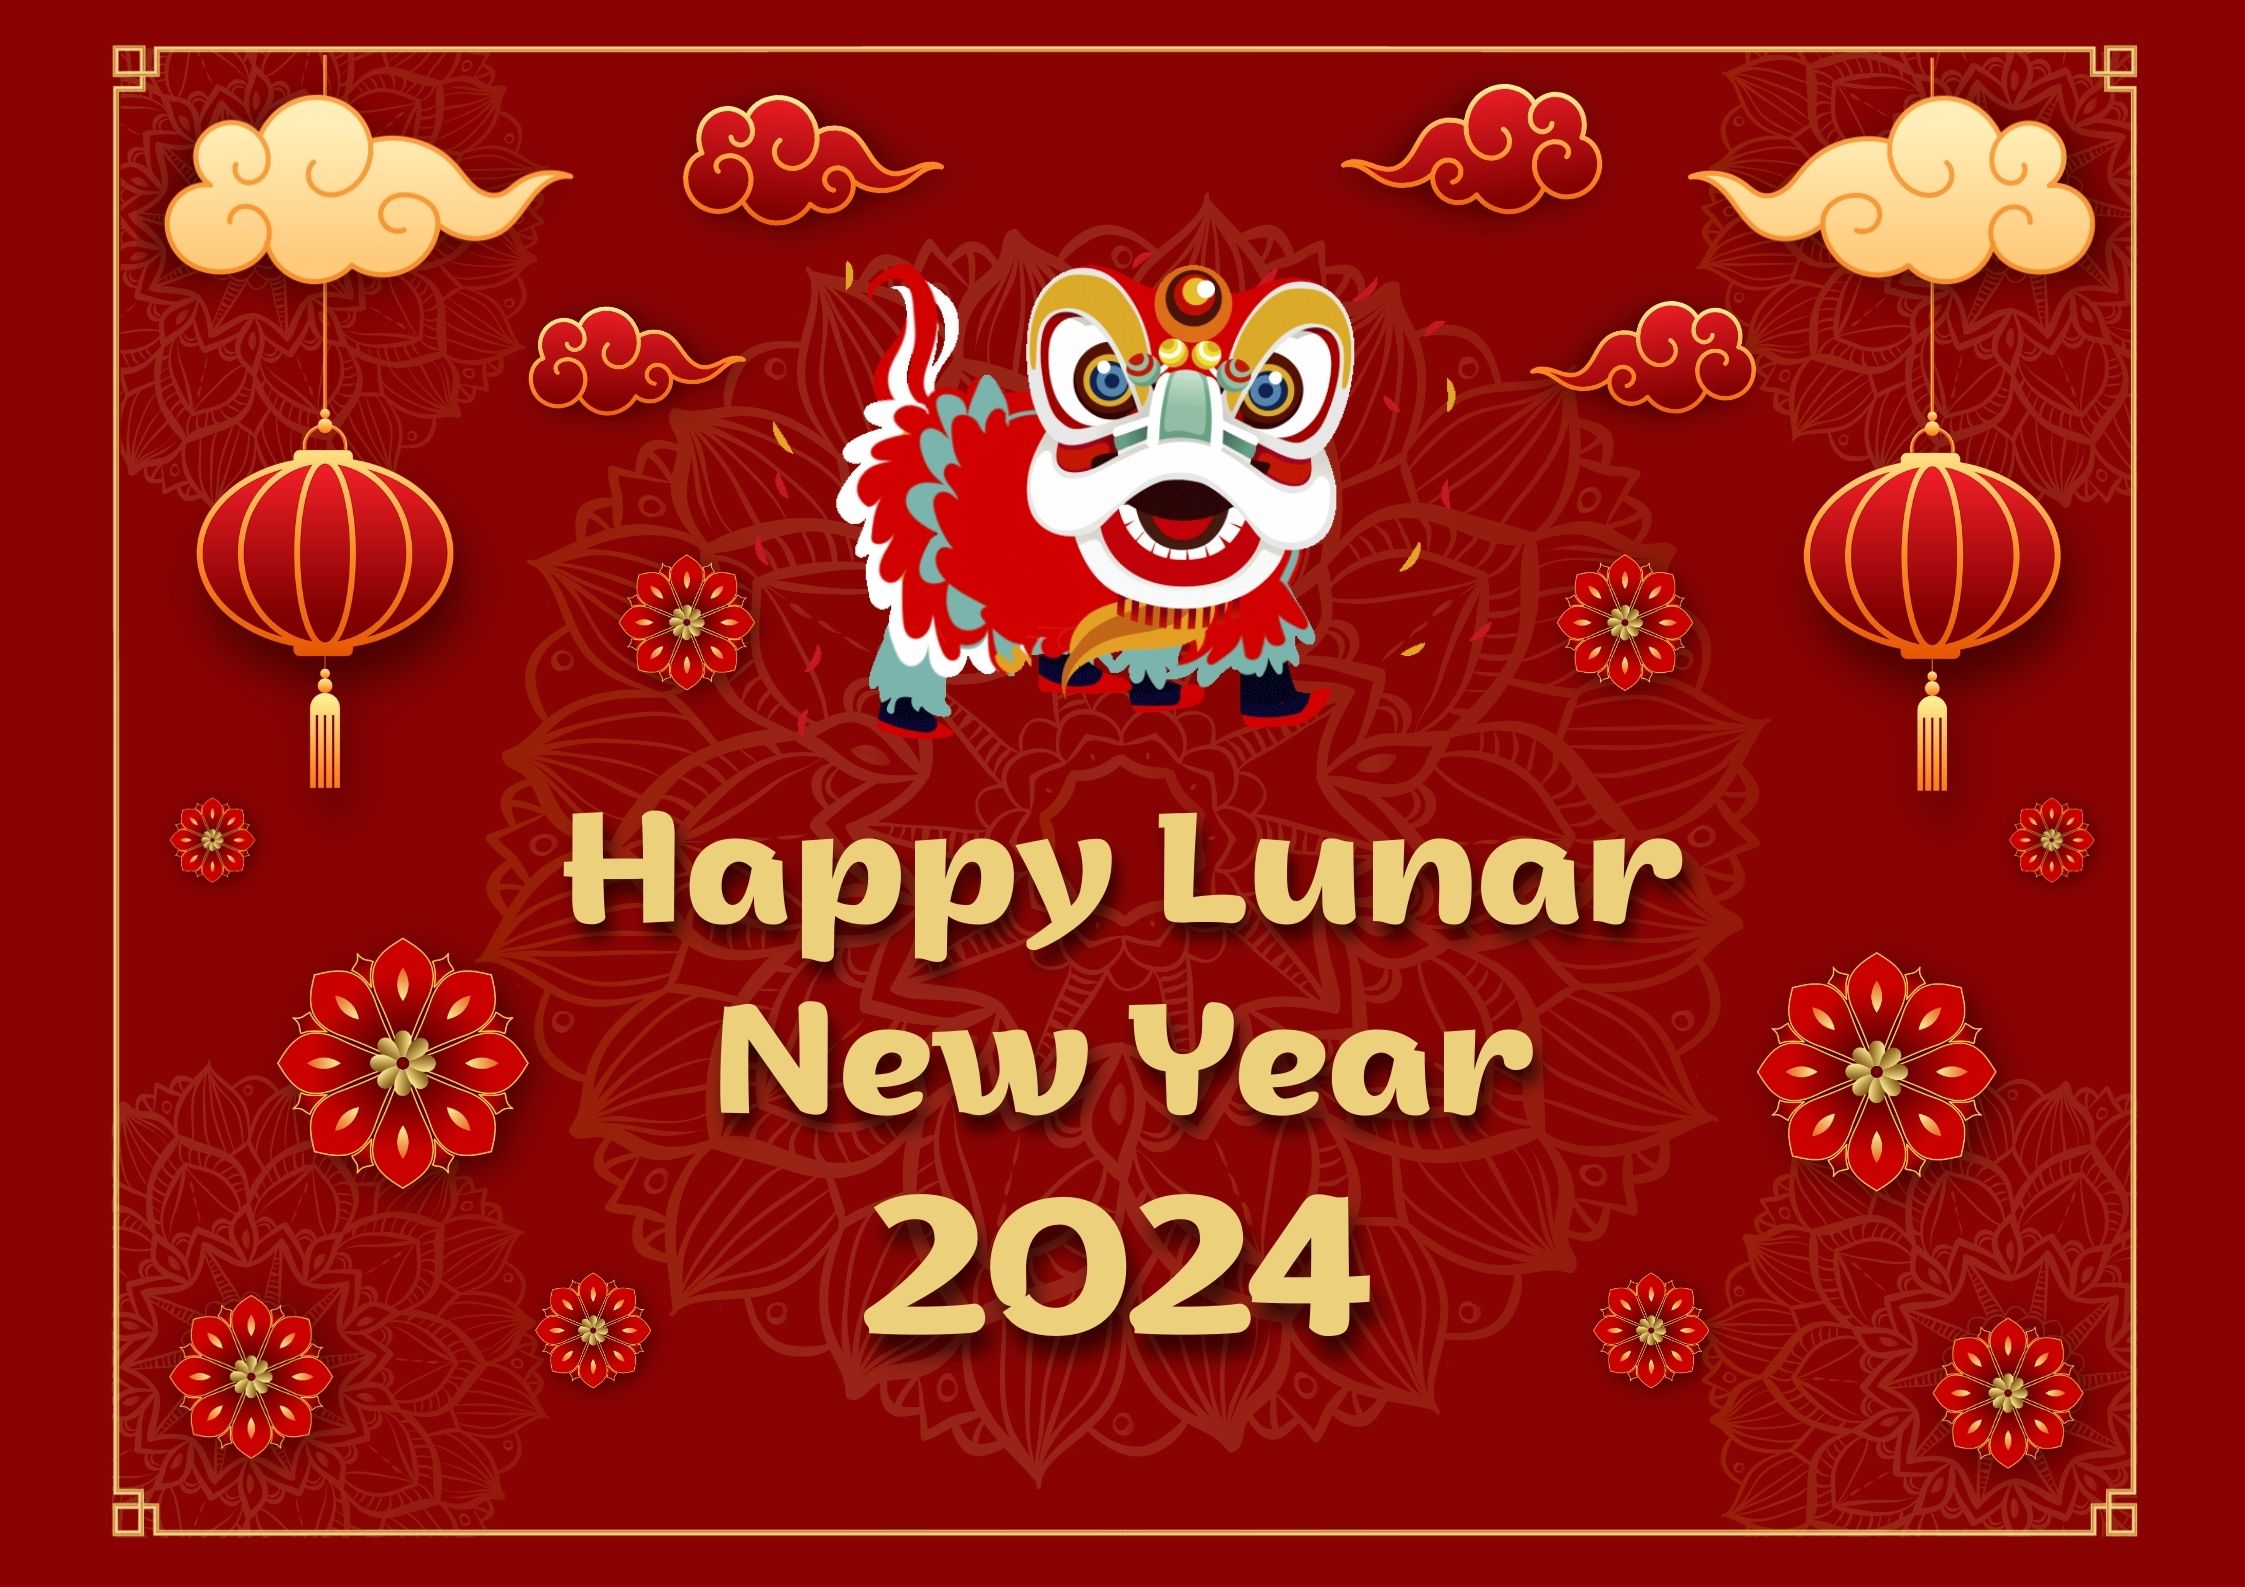 We will be closed from Feb. 8, 2024 to Feb. 14, 2024 for Chinese New Year